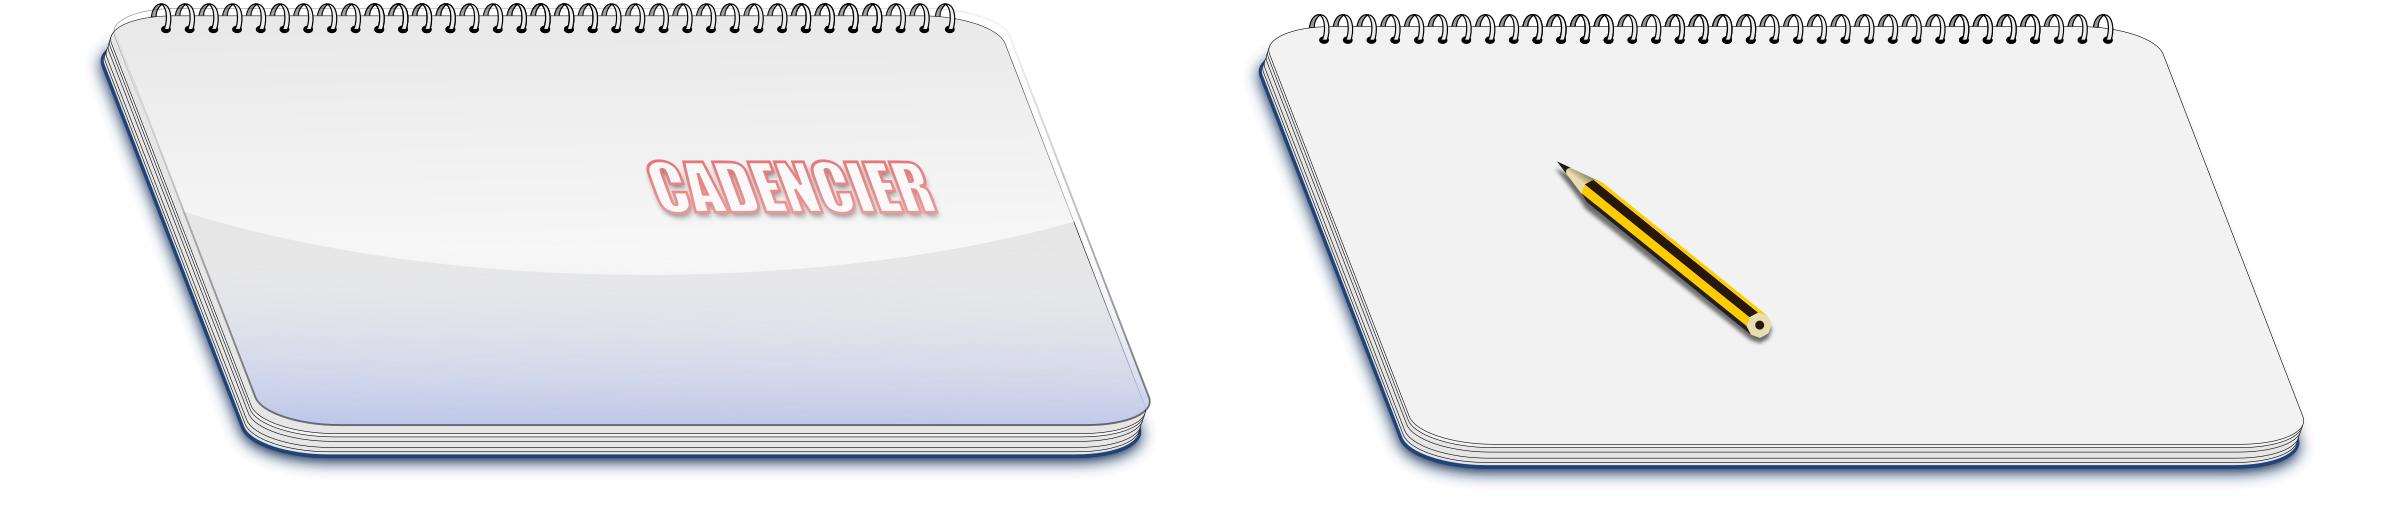 Large notebook with pencil png